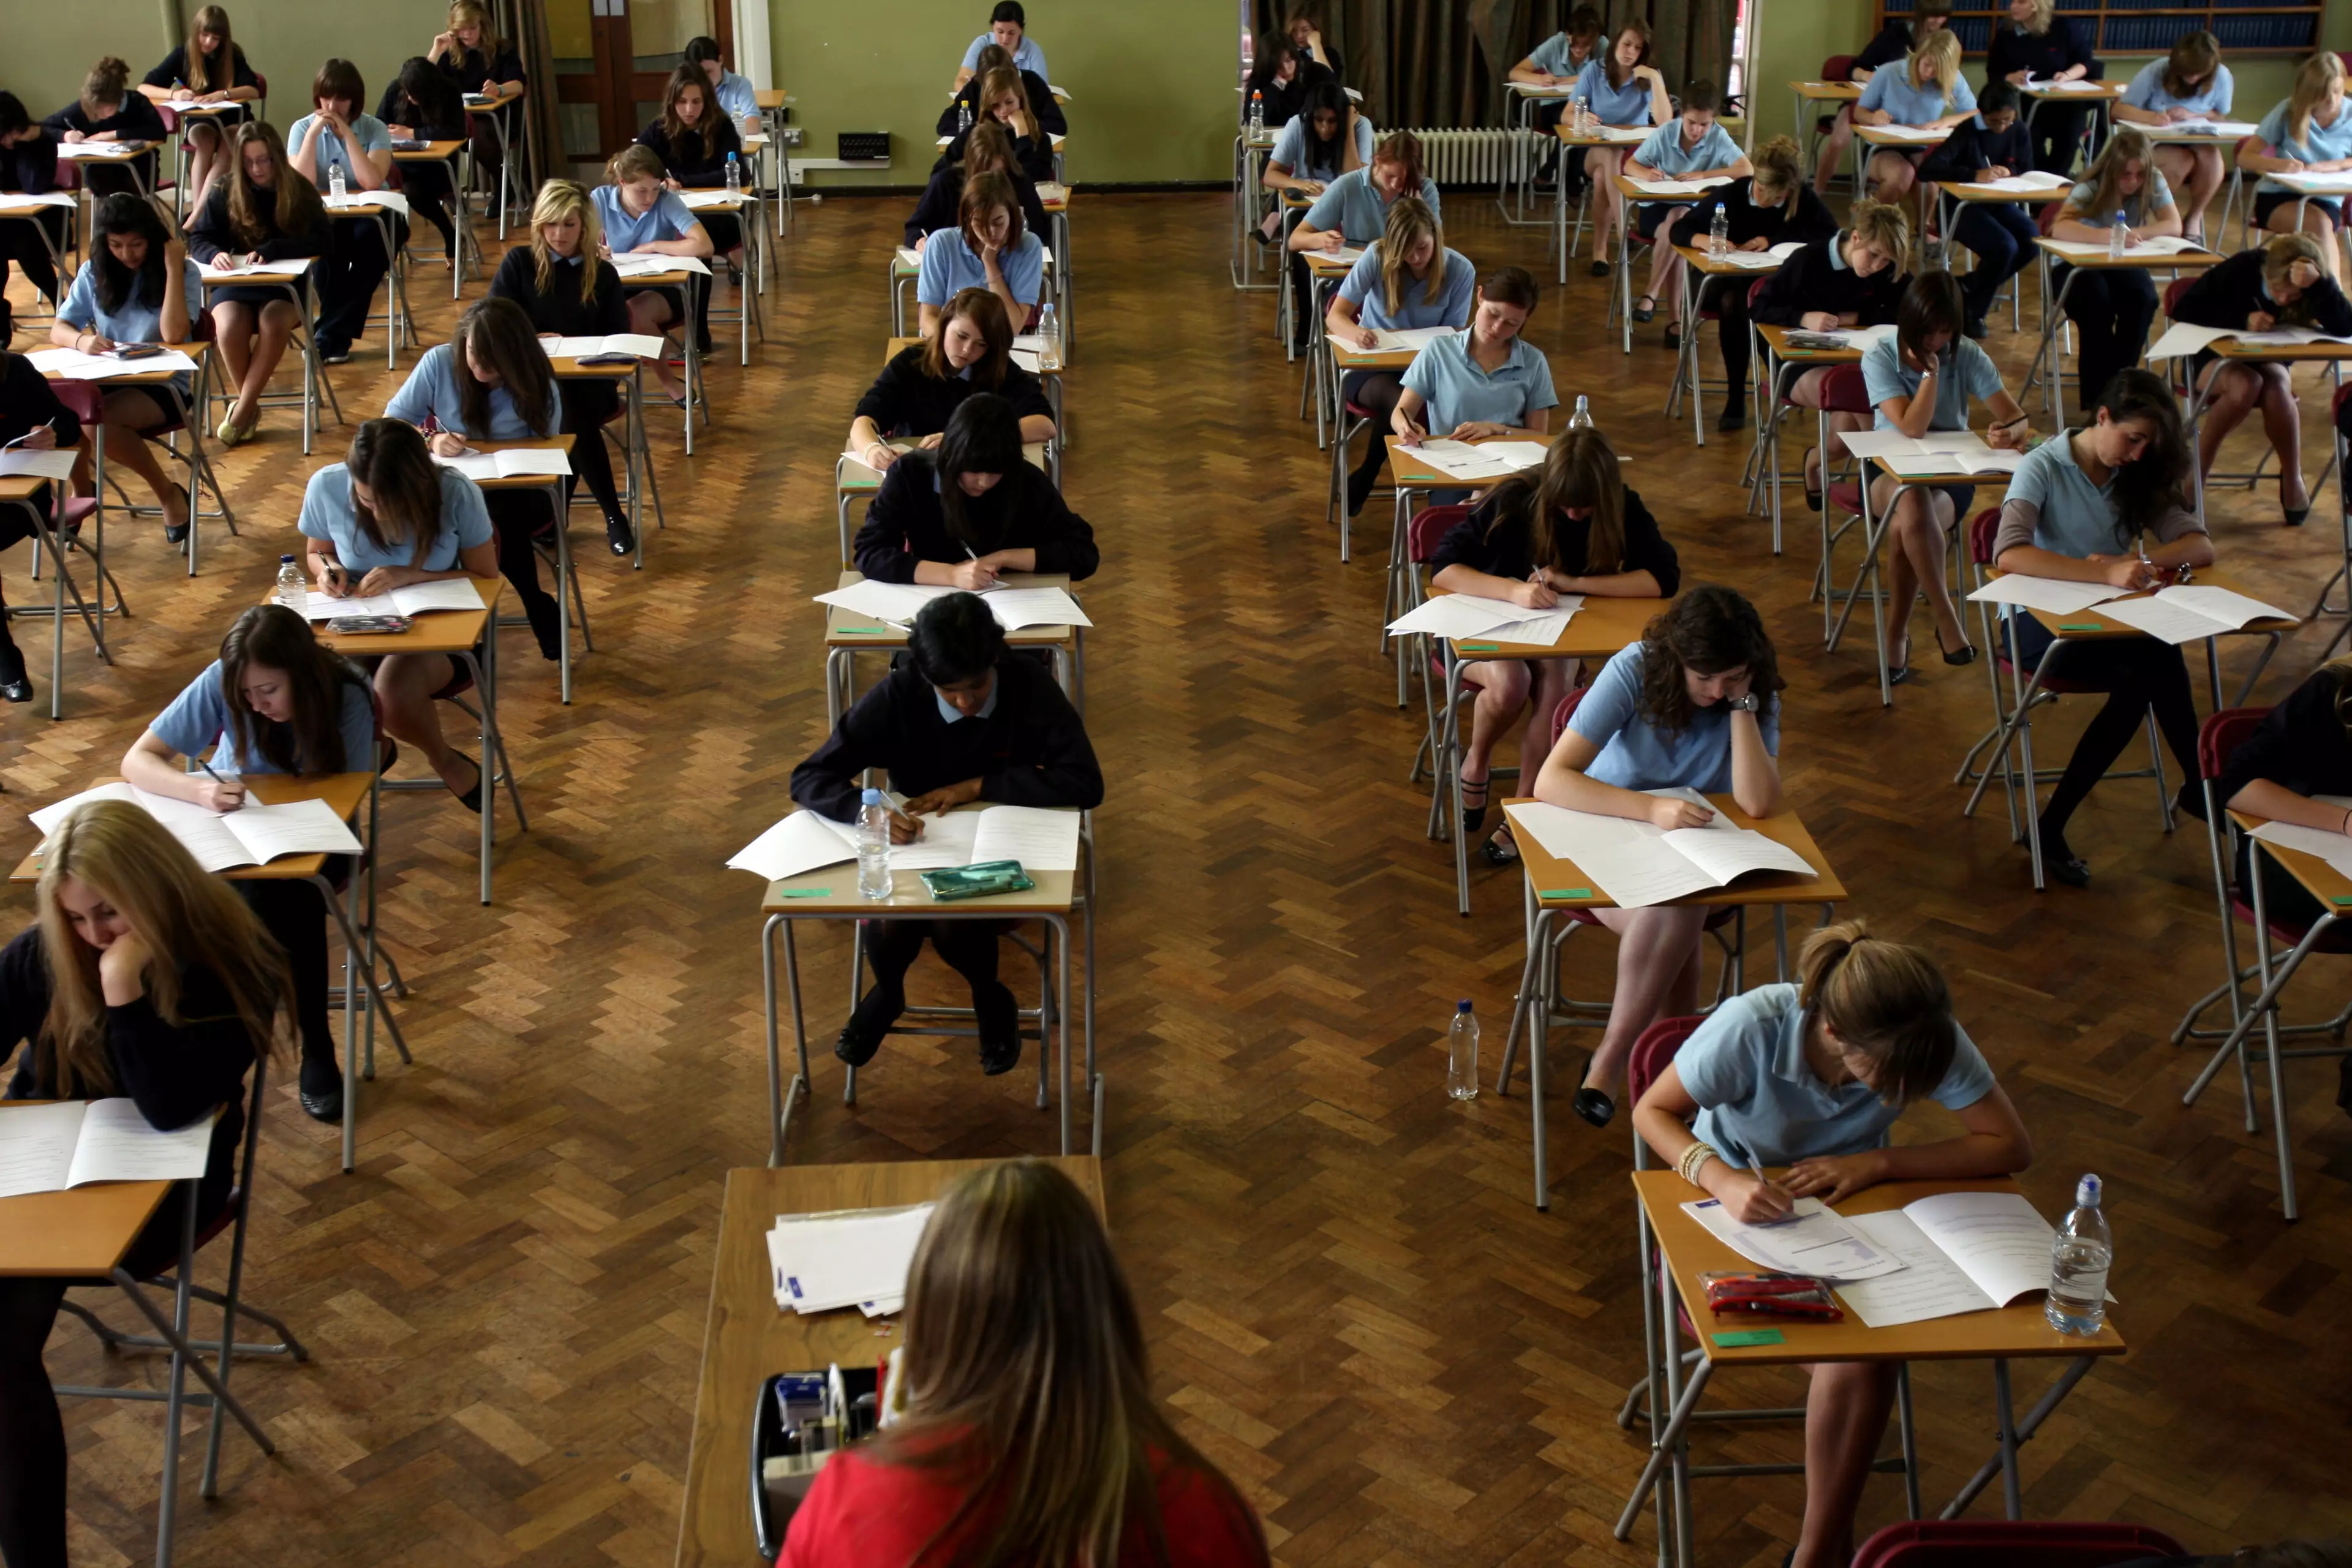 Students will still get GCSE and AS/A Levels but they will be a bit different this year.